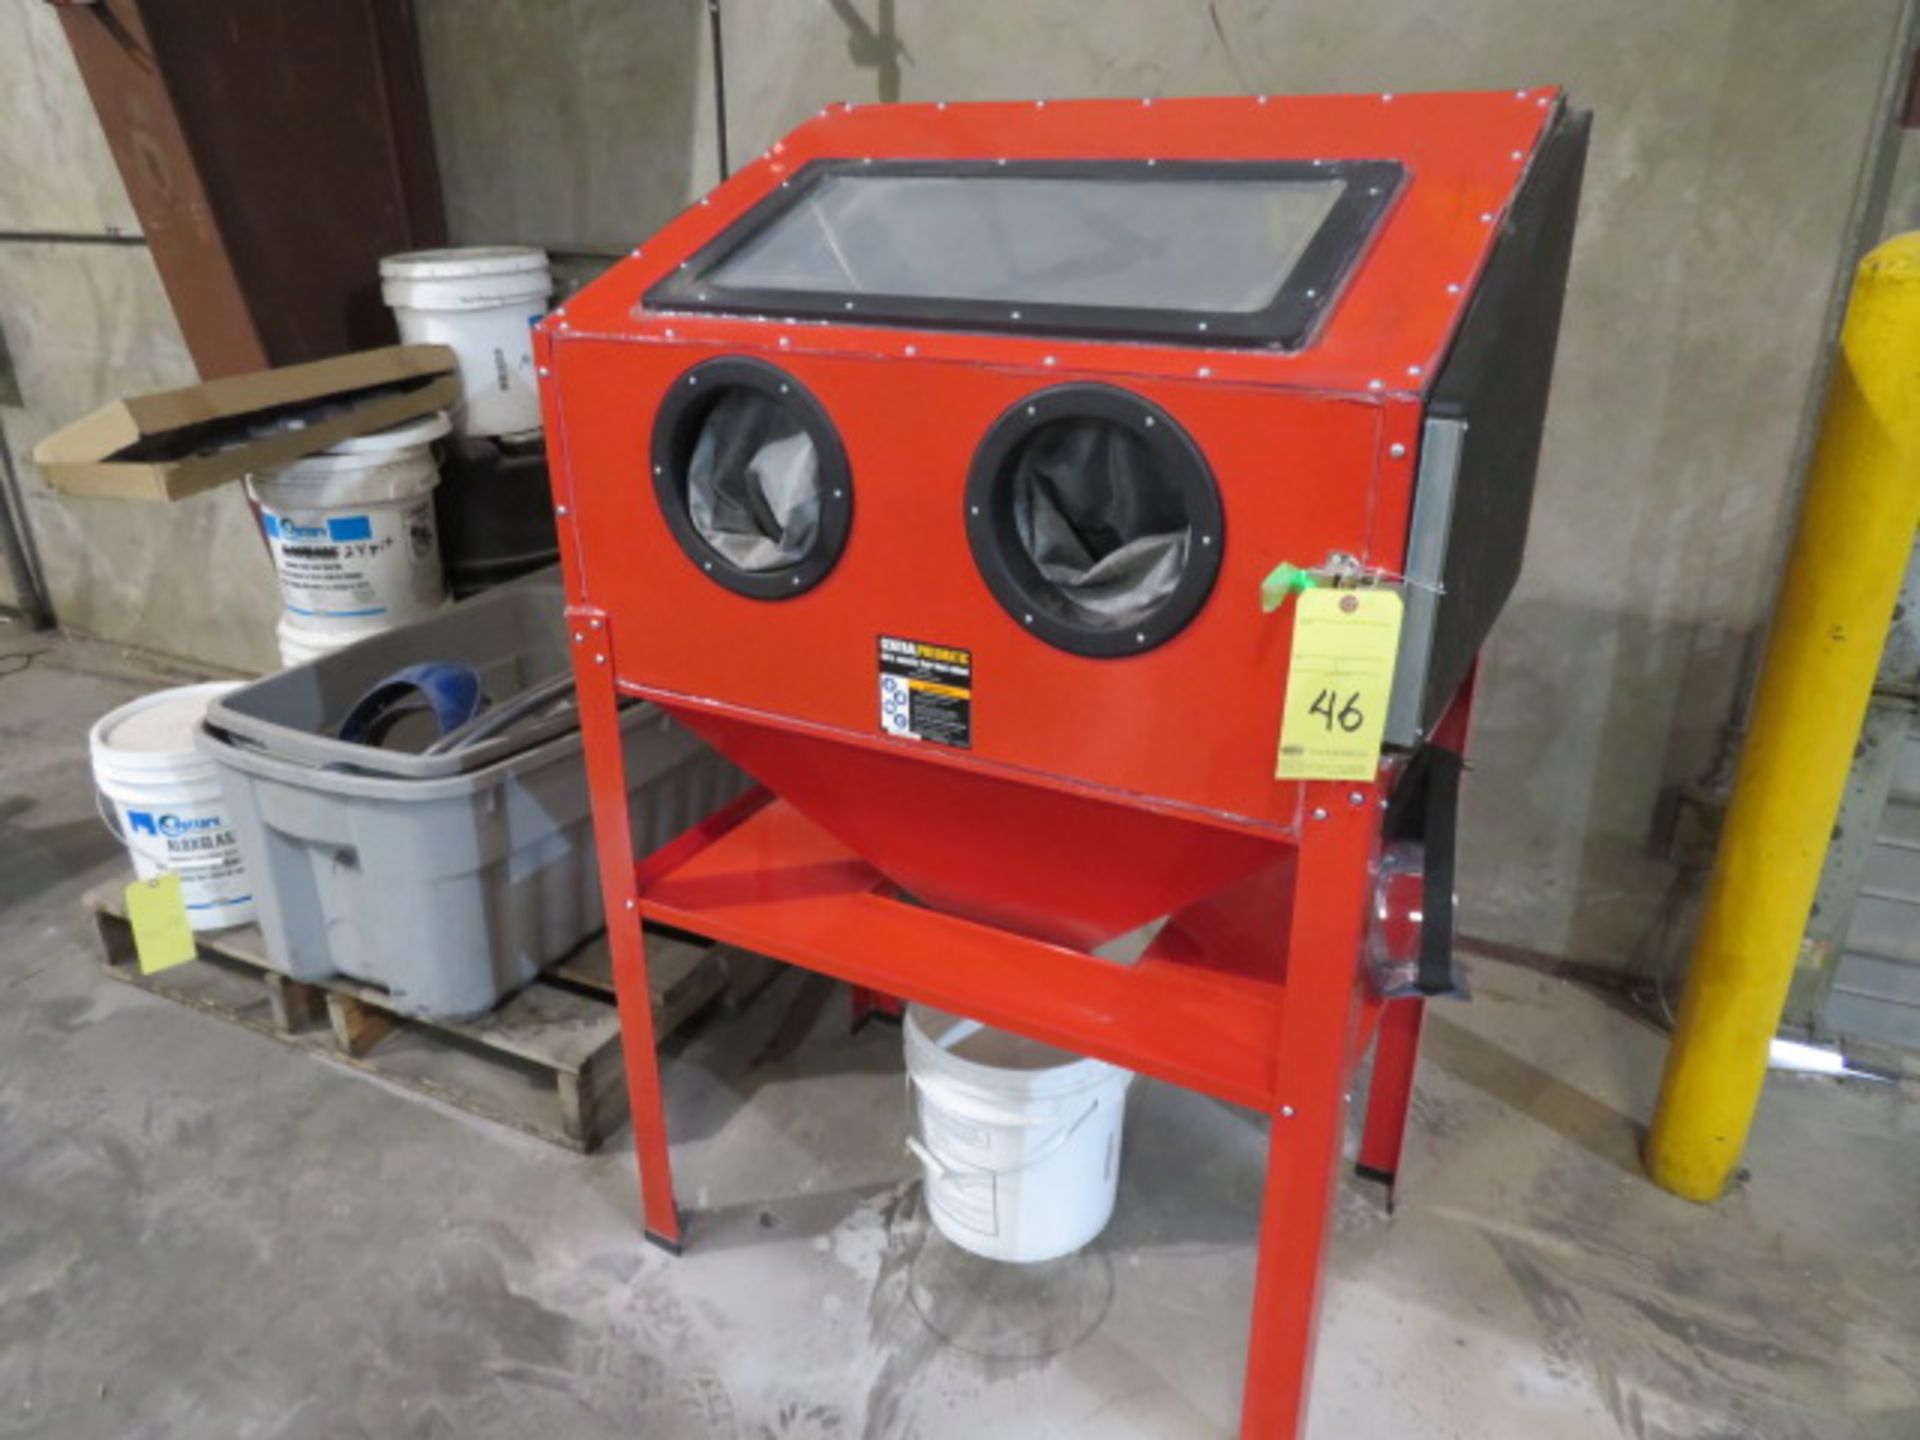 LOT CONSISTING OF: Central Pneumatic glove box blast cabinet & pallet of material & accessories